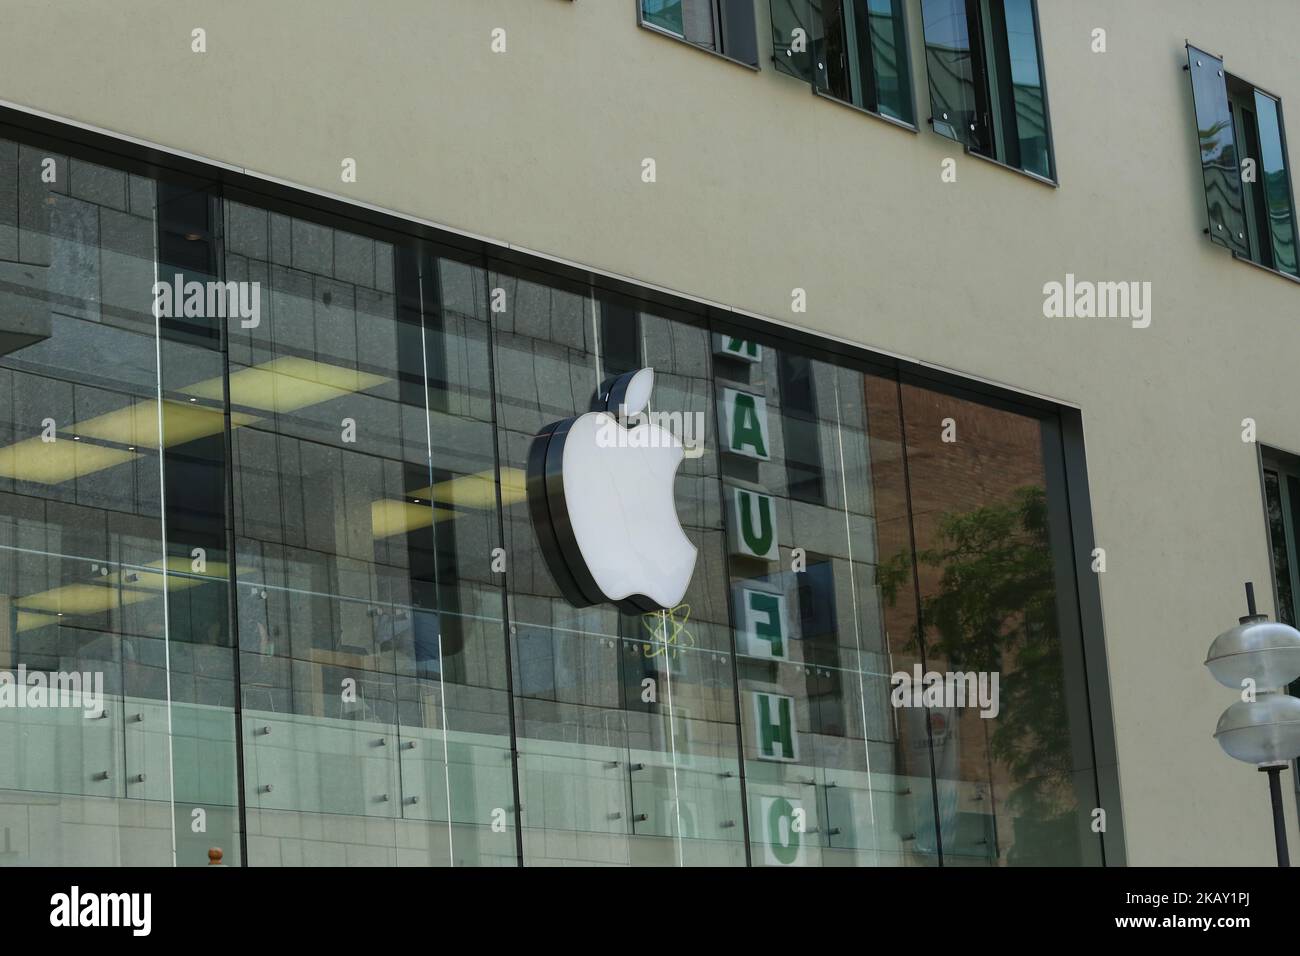 The logo of the American multinational technology company Apple headquartered in Cupertino, California, that designs, develops, and sells consumer electronics, computer software, and online services is seen in the Munich pedestrian zone. (Photo by Alexander Pohl/NurPhoto) Stock Photo